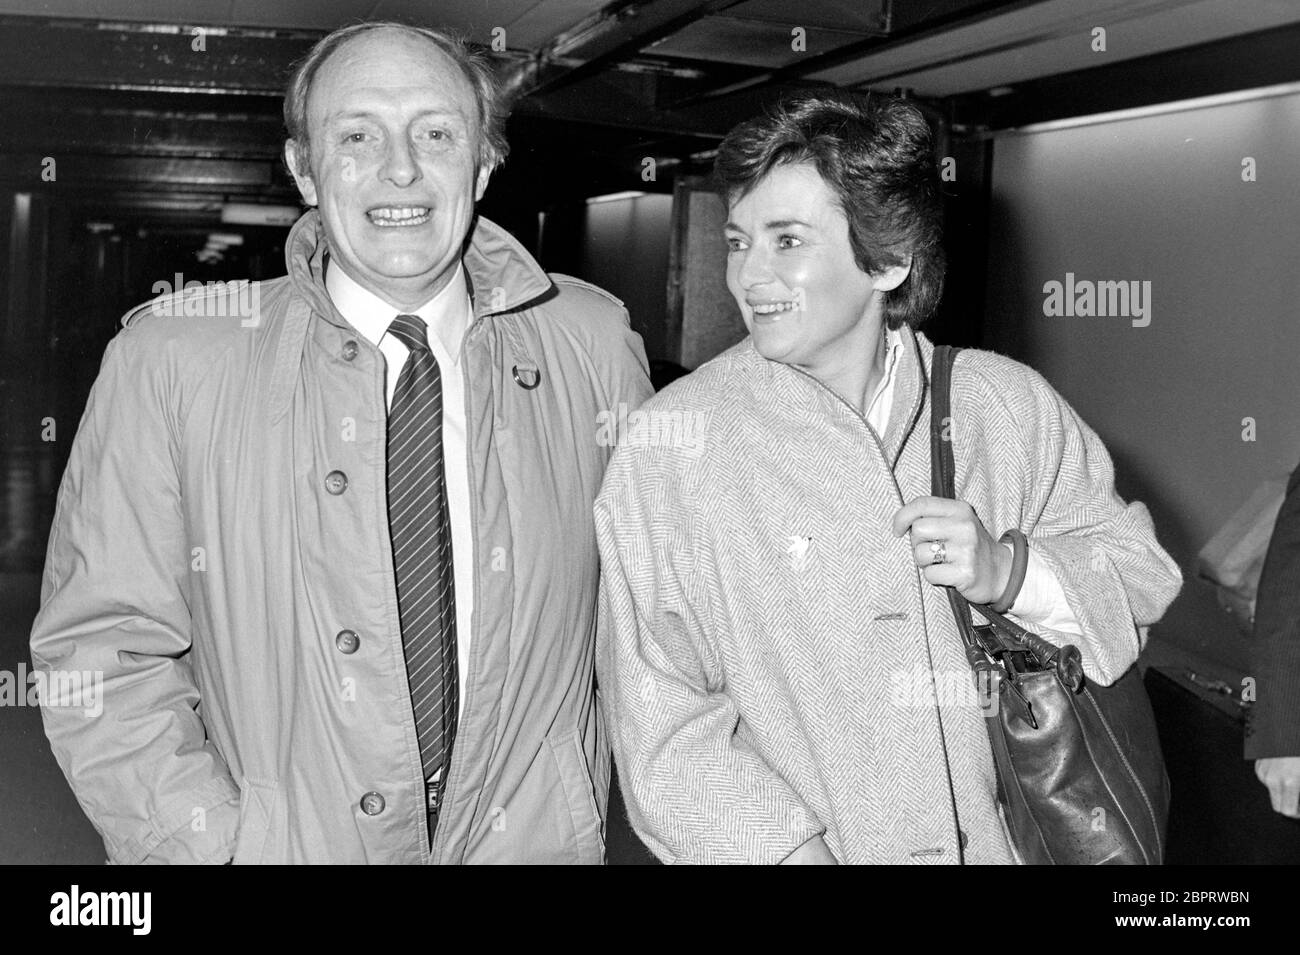 Labour leader Neil Kinnock and wife Glenys leaving London's Heathrow Airport in march 1984. Stock Photo